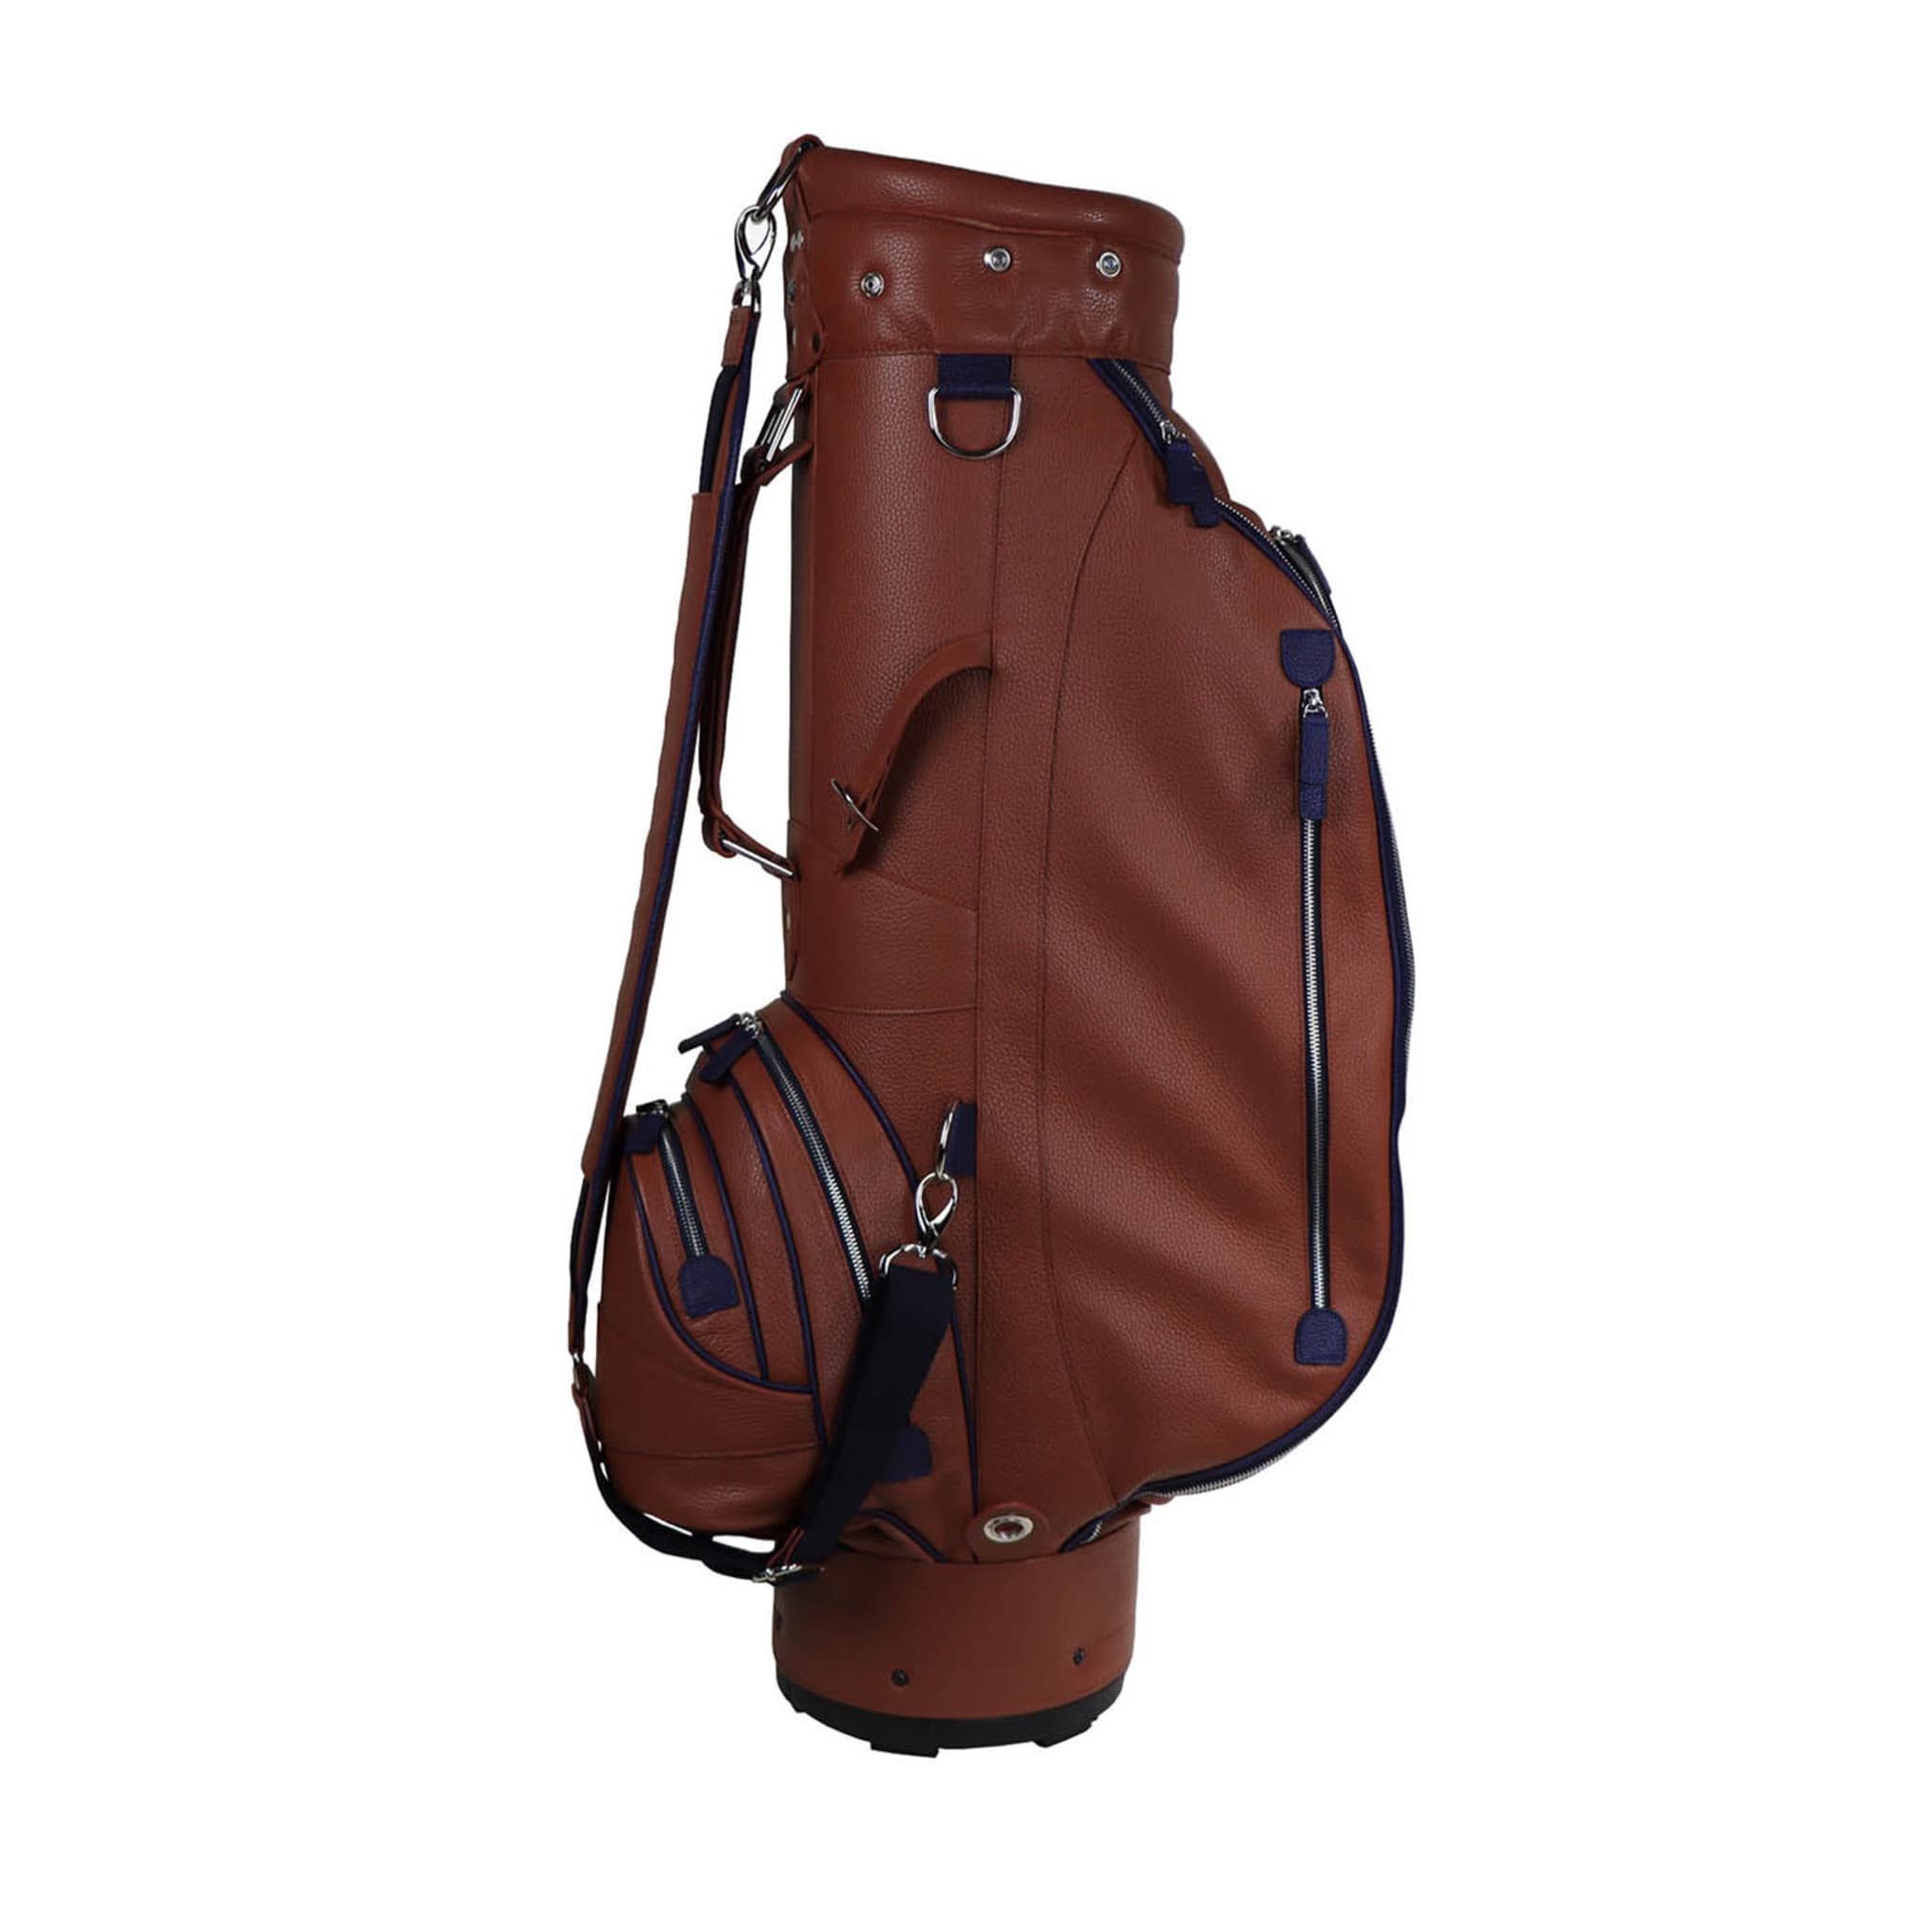 Imperiale Brown & Blue Leather Golf Bag - Main view